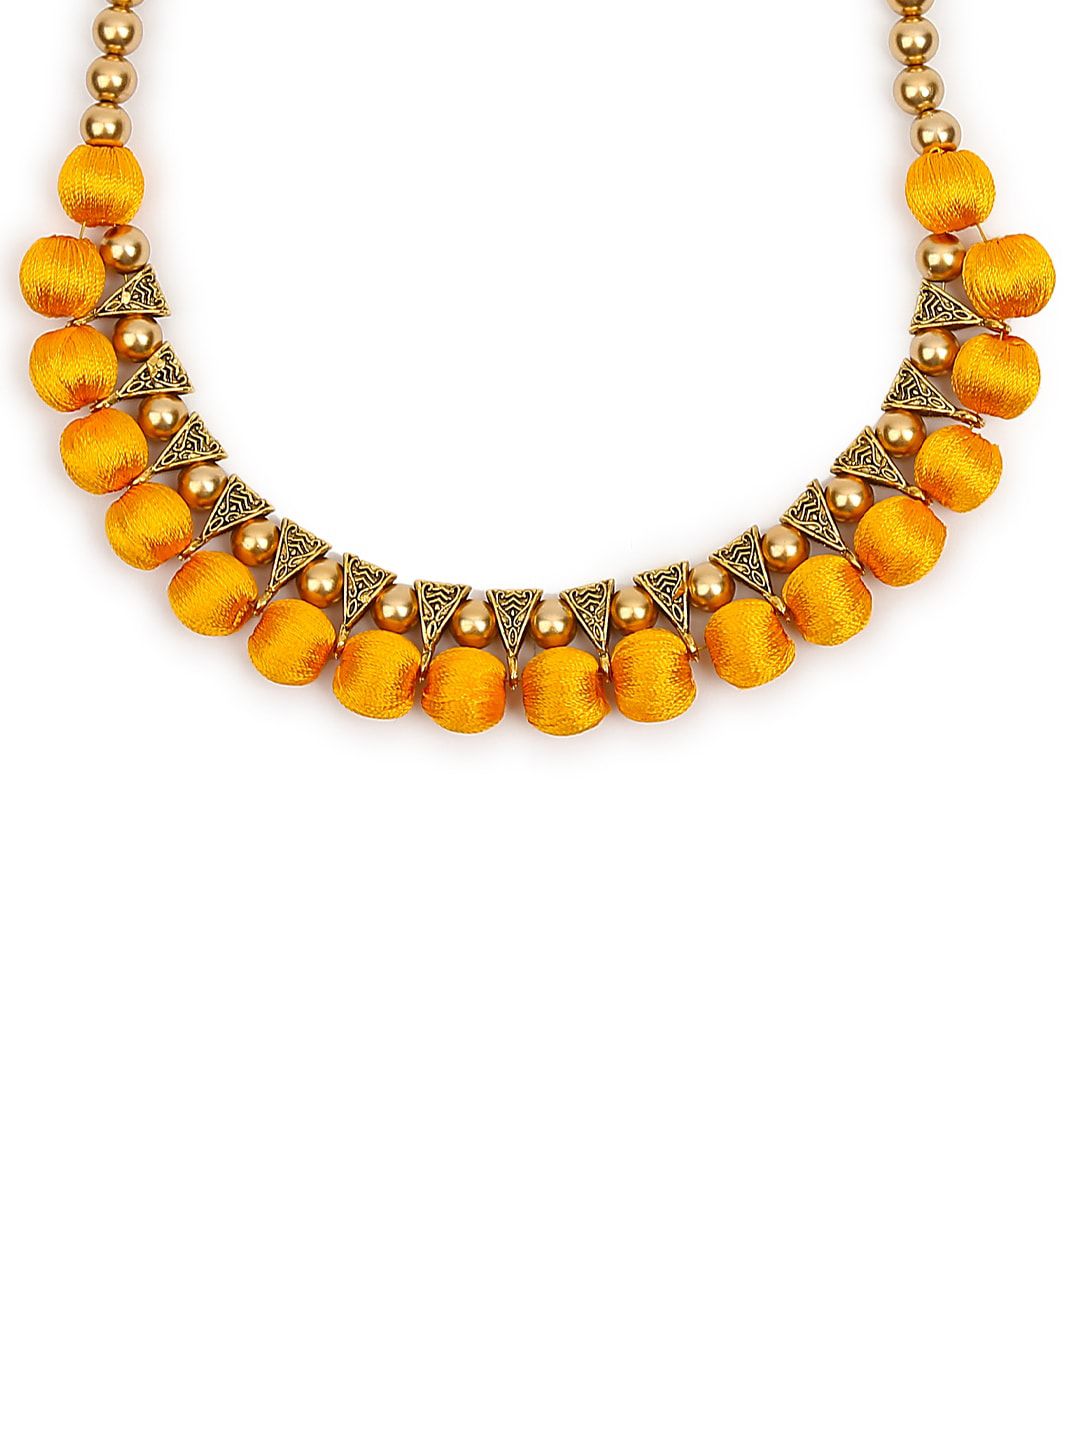 AKSHARA Gold-Toned & Yellow Beaded Handcrafted Choker Necklace Price in India